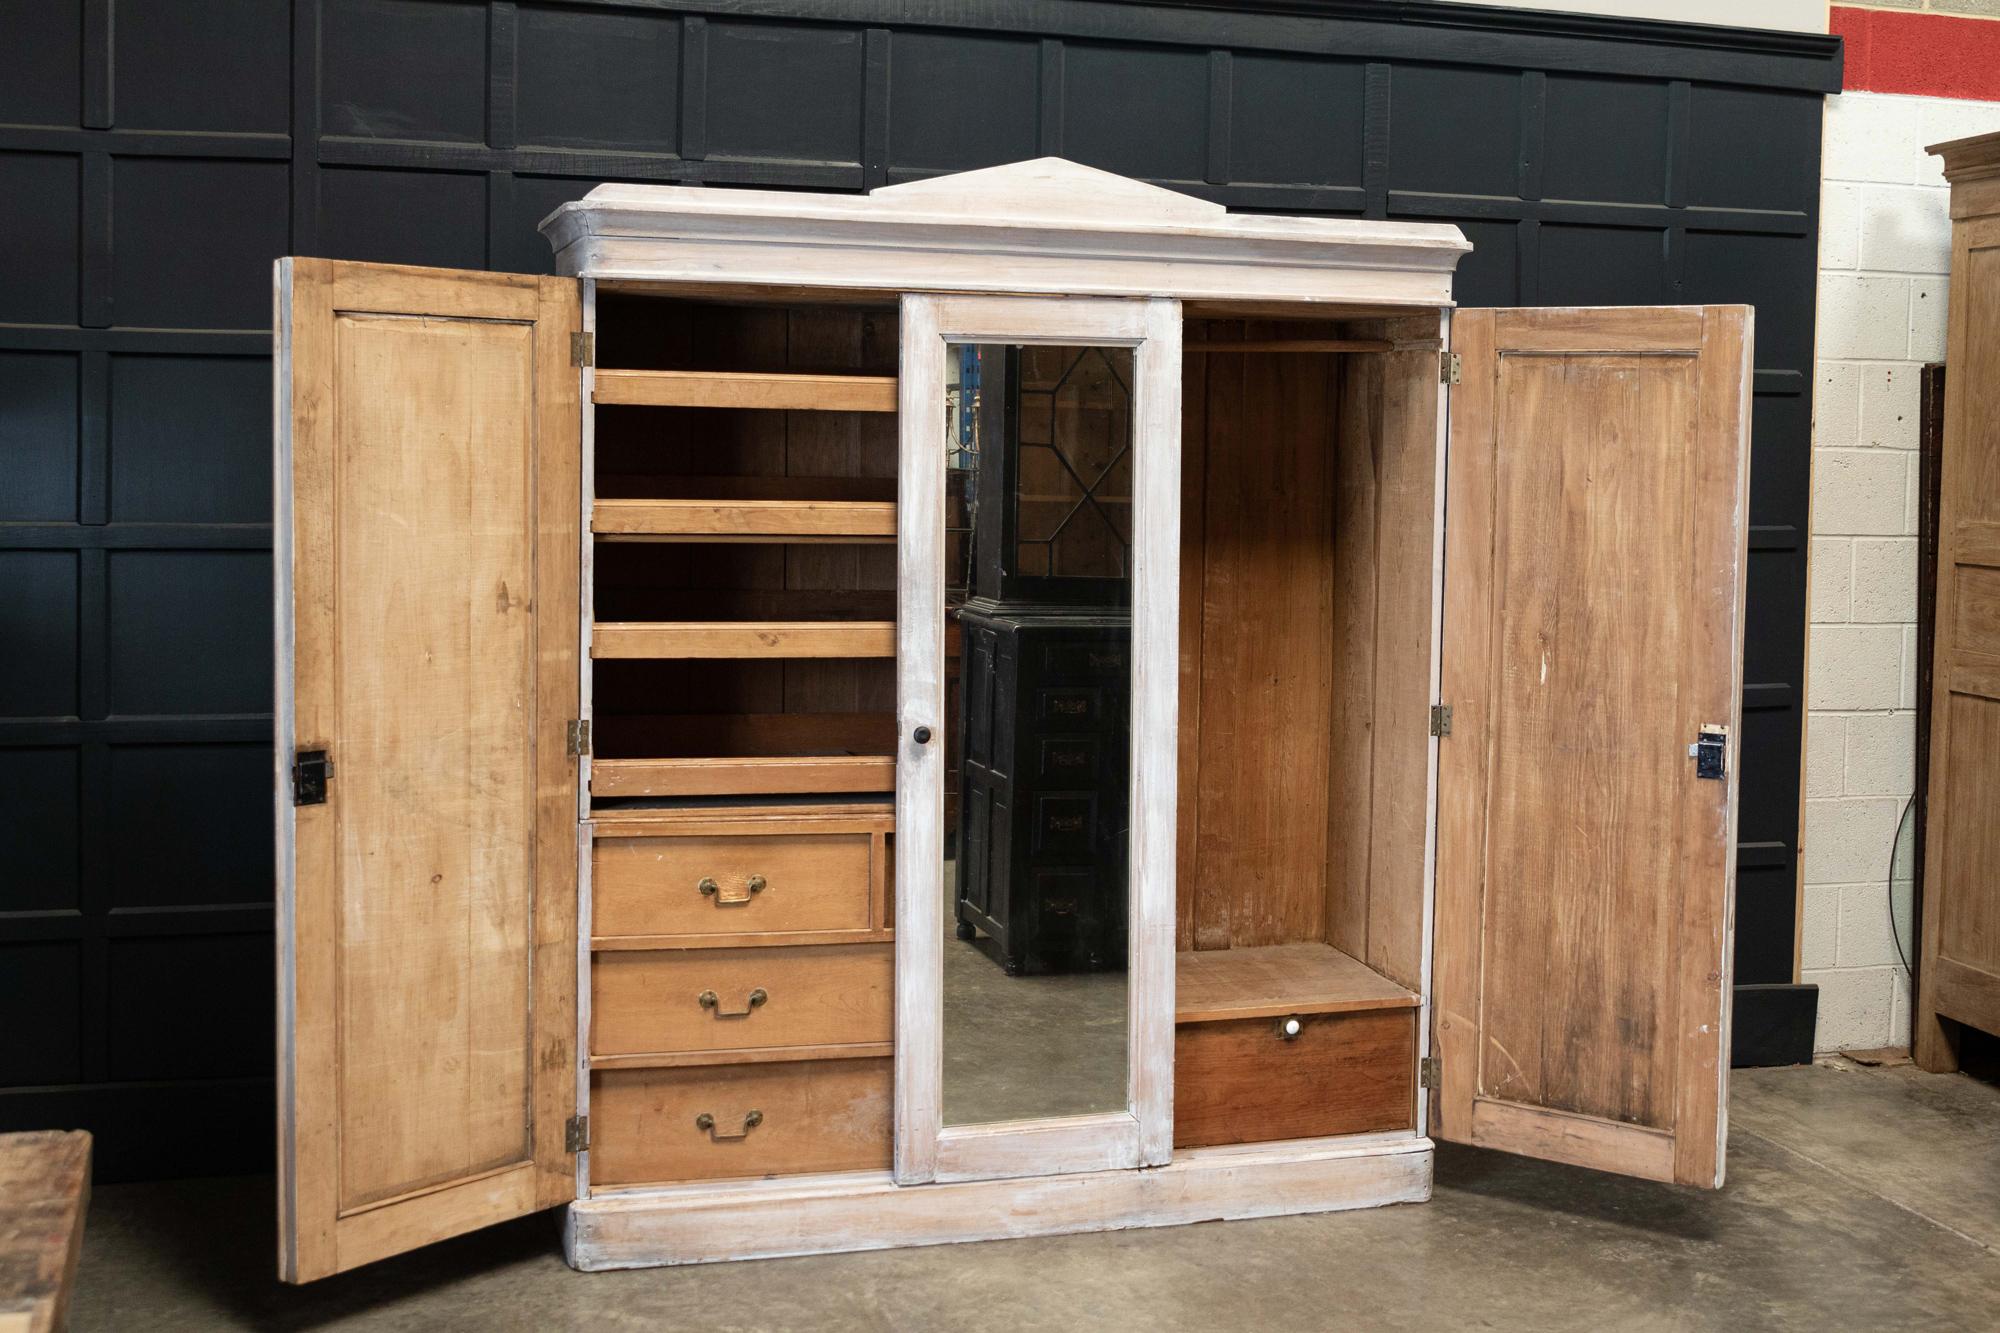 Circa 1870

19thC English Painted Pine Compactum Wardrobe

Made of 8 individual sections that fit together

(deep scratches in the mirror)

sku 537

W180 x D55 x H214cm